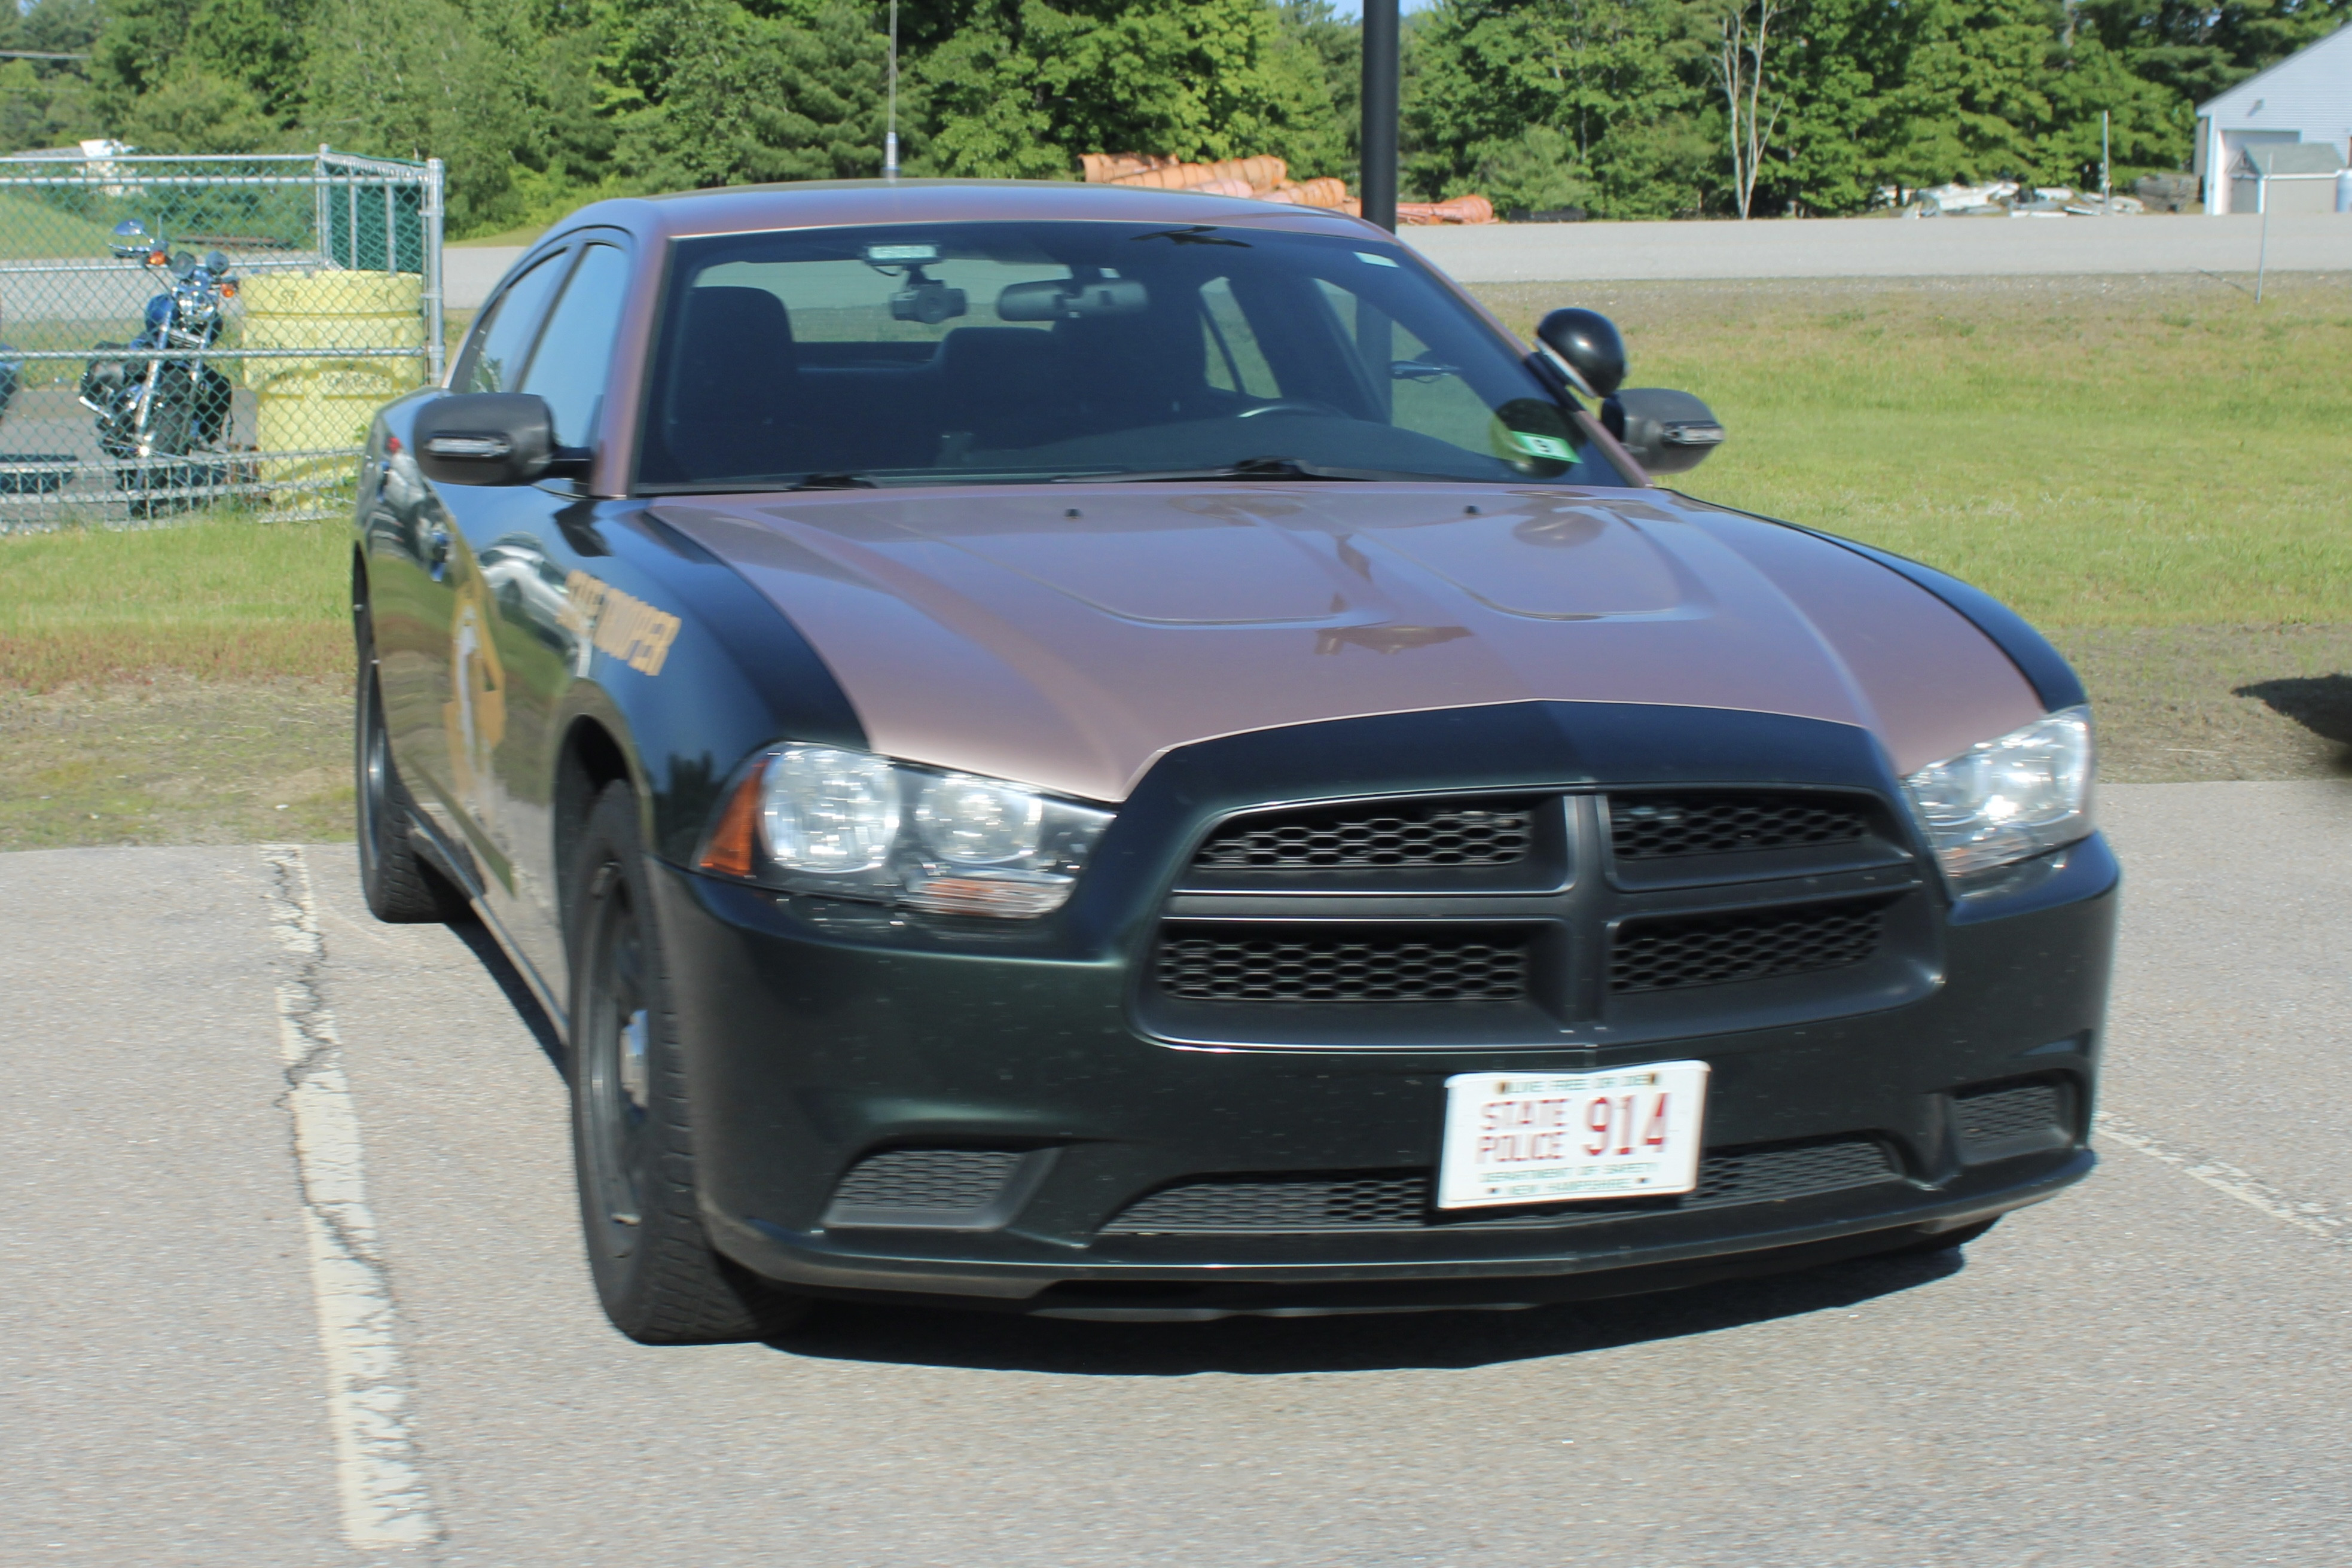 A photo  of New Hampshire State Police
            Cruiser 914, a 2011-2013 Dodge Charger             taken by @riemergencyvehicles